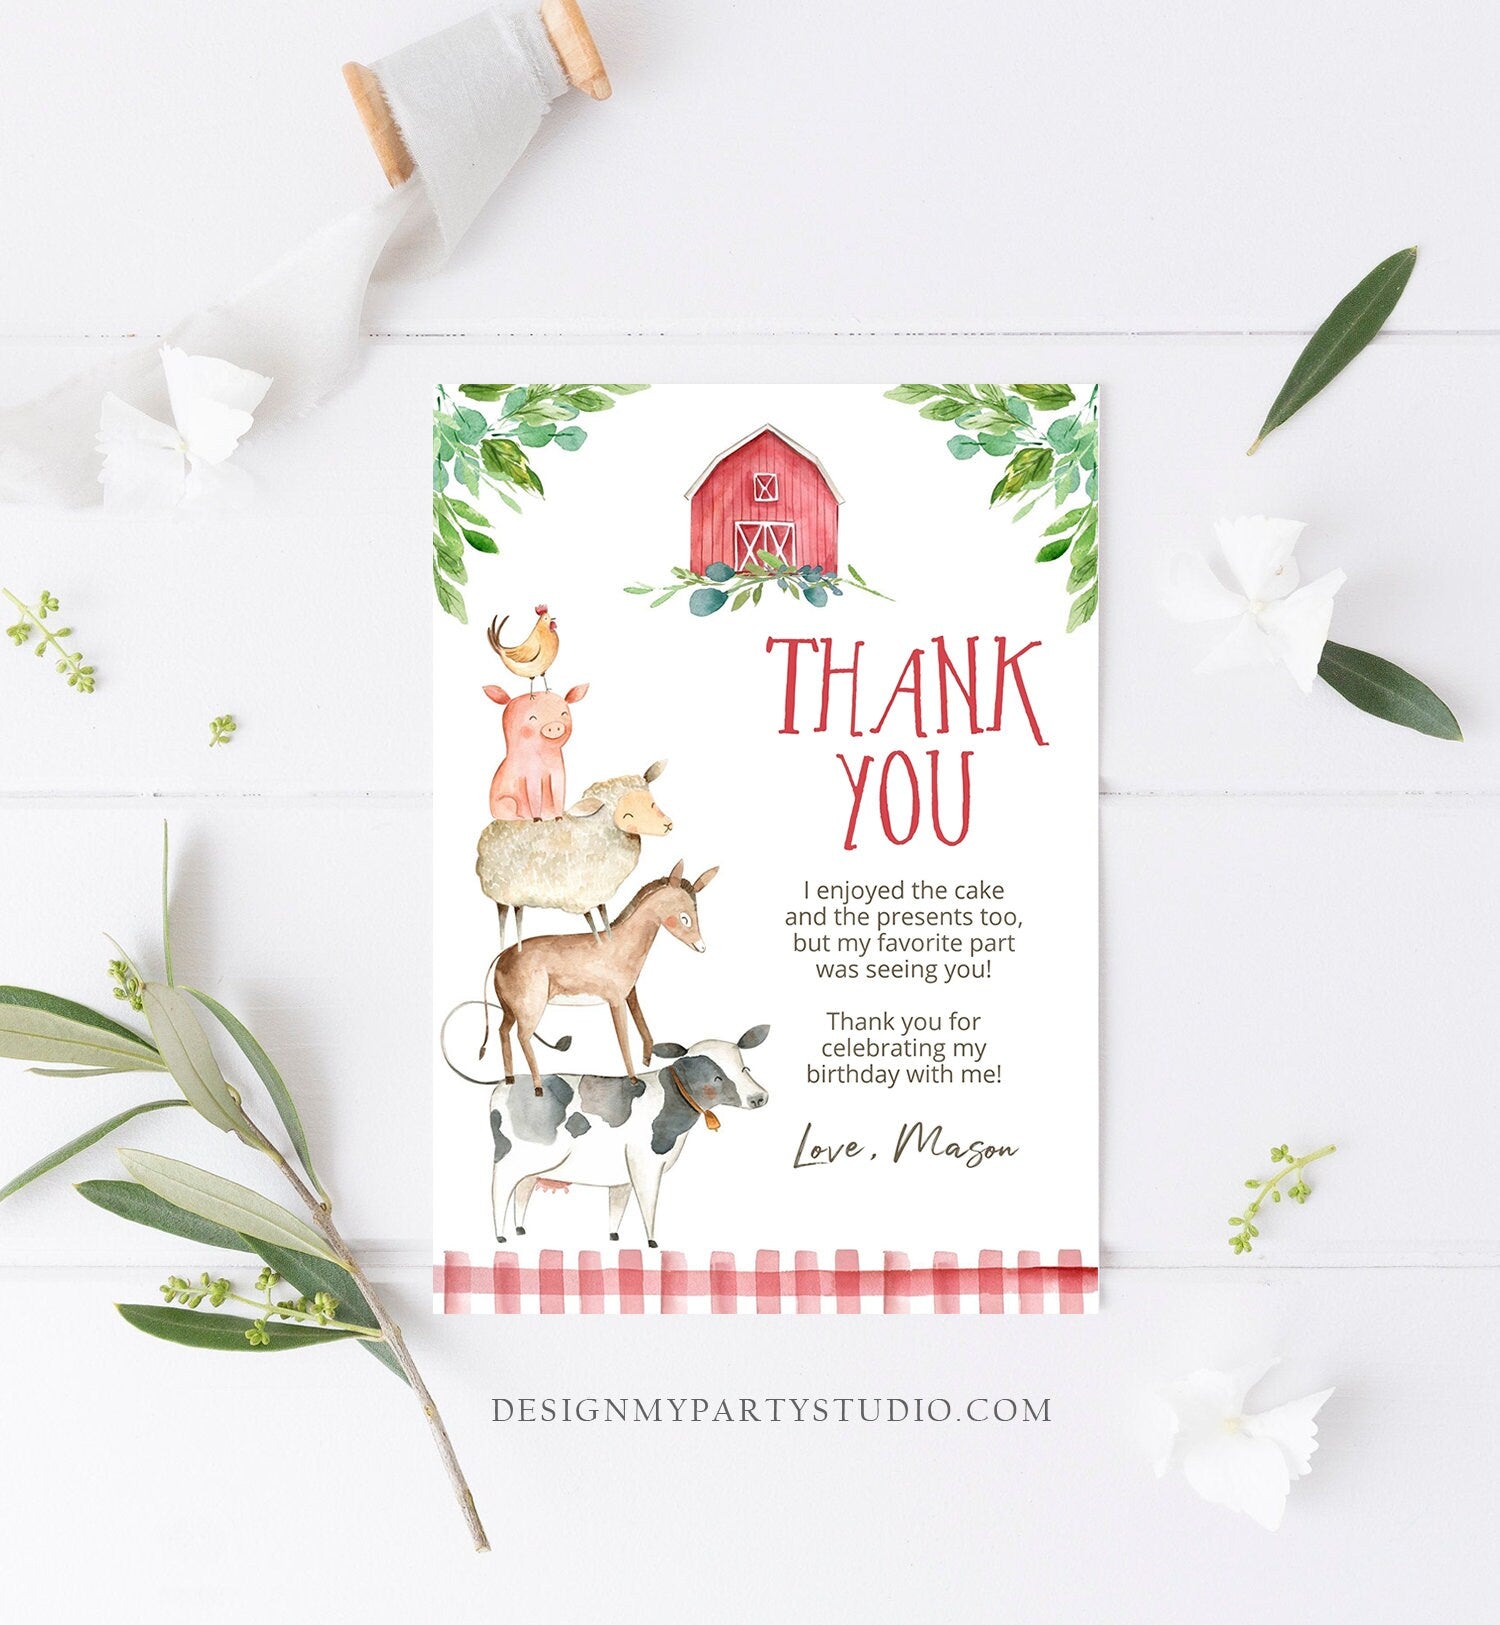 Editable Farm Animals Thank you Card Red Gingham Farm Birthday Boy Barnyard Thank You Card Birthday Template Instant Download Corjl 0155